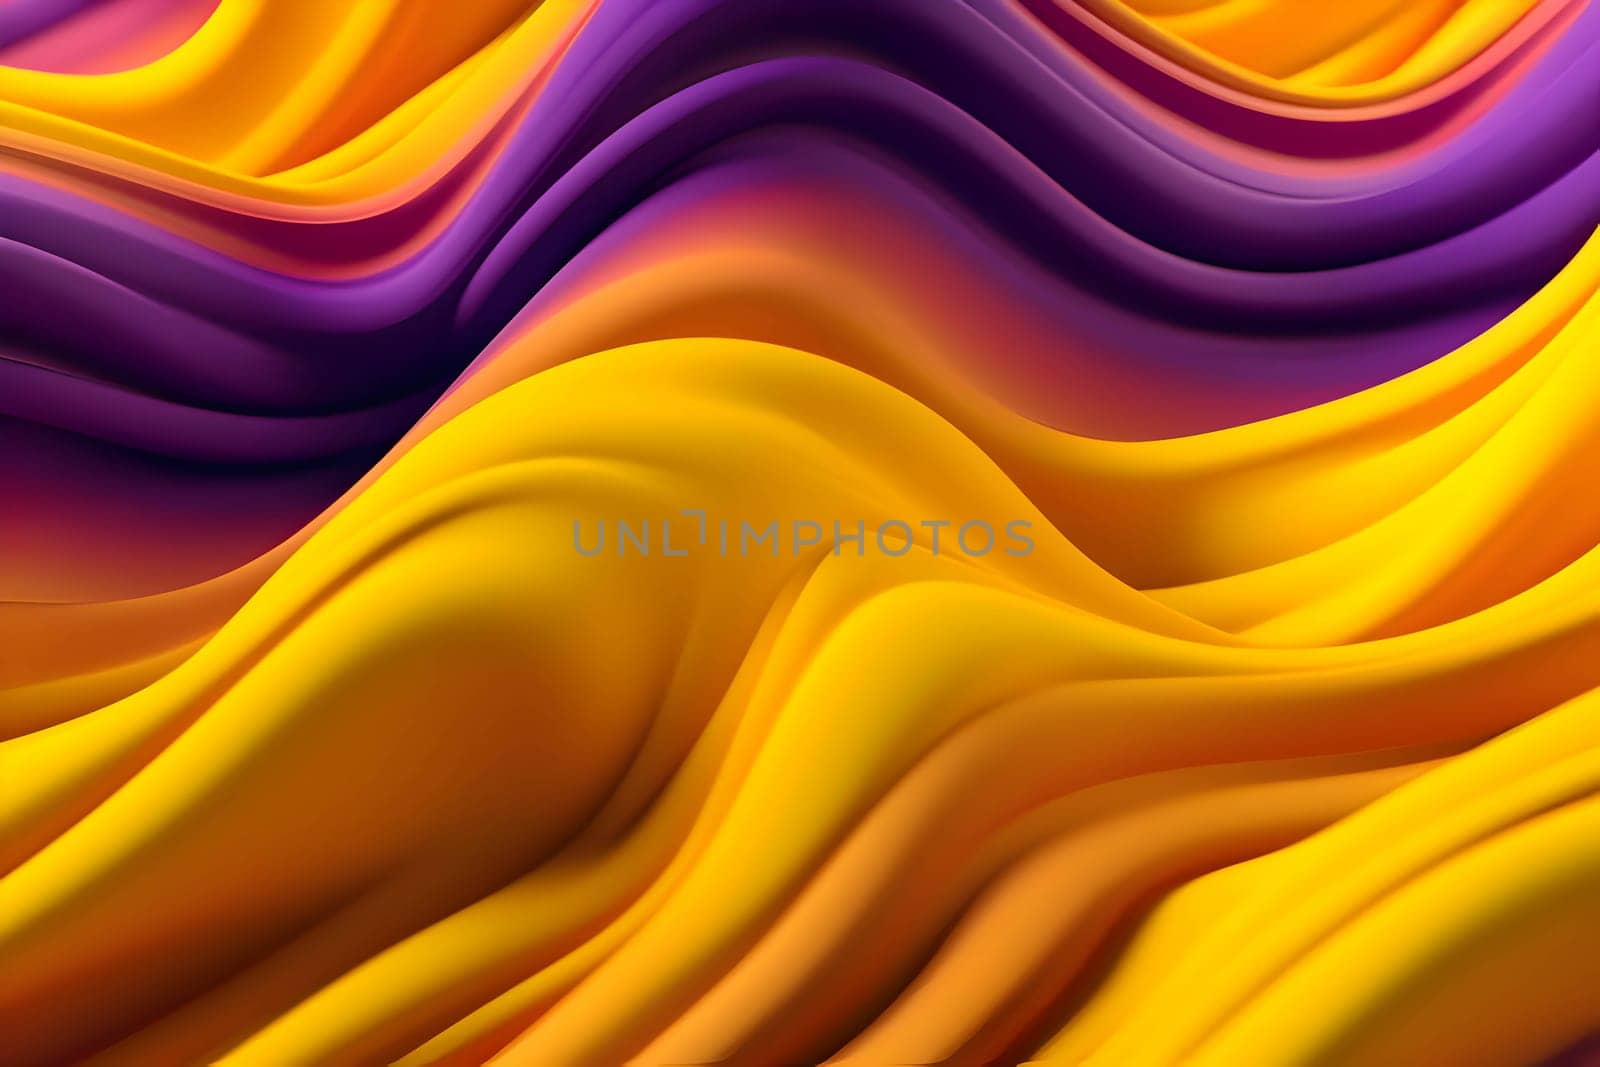 An abstract background with 3D waves and lines in purple and yellow, creating a visually captivating and dynamic design.